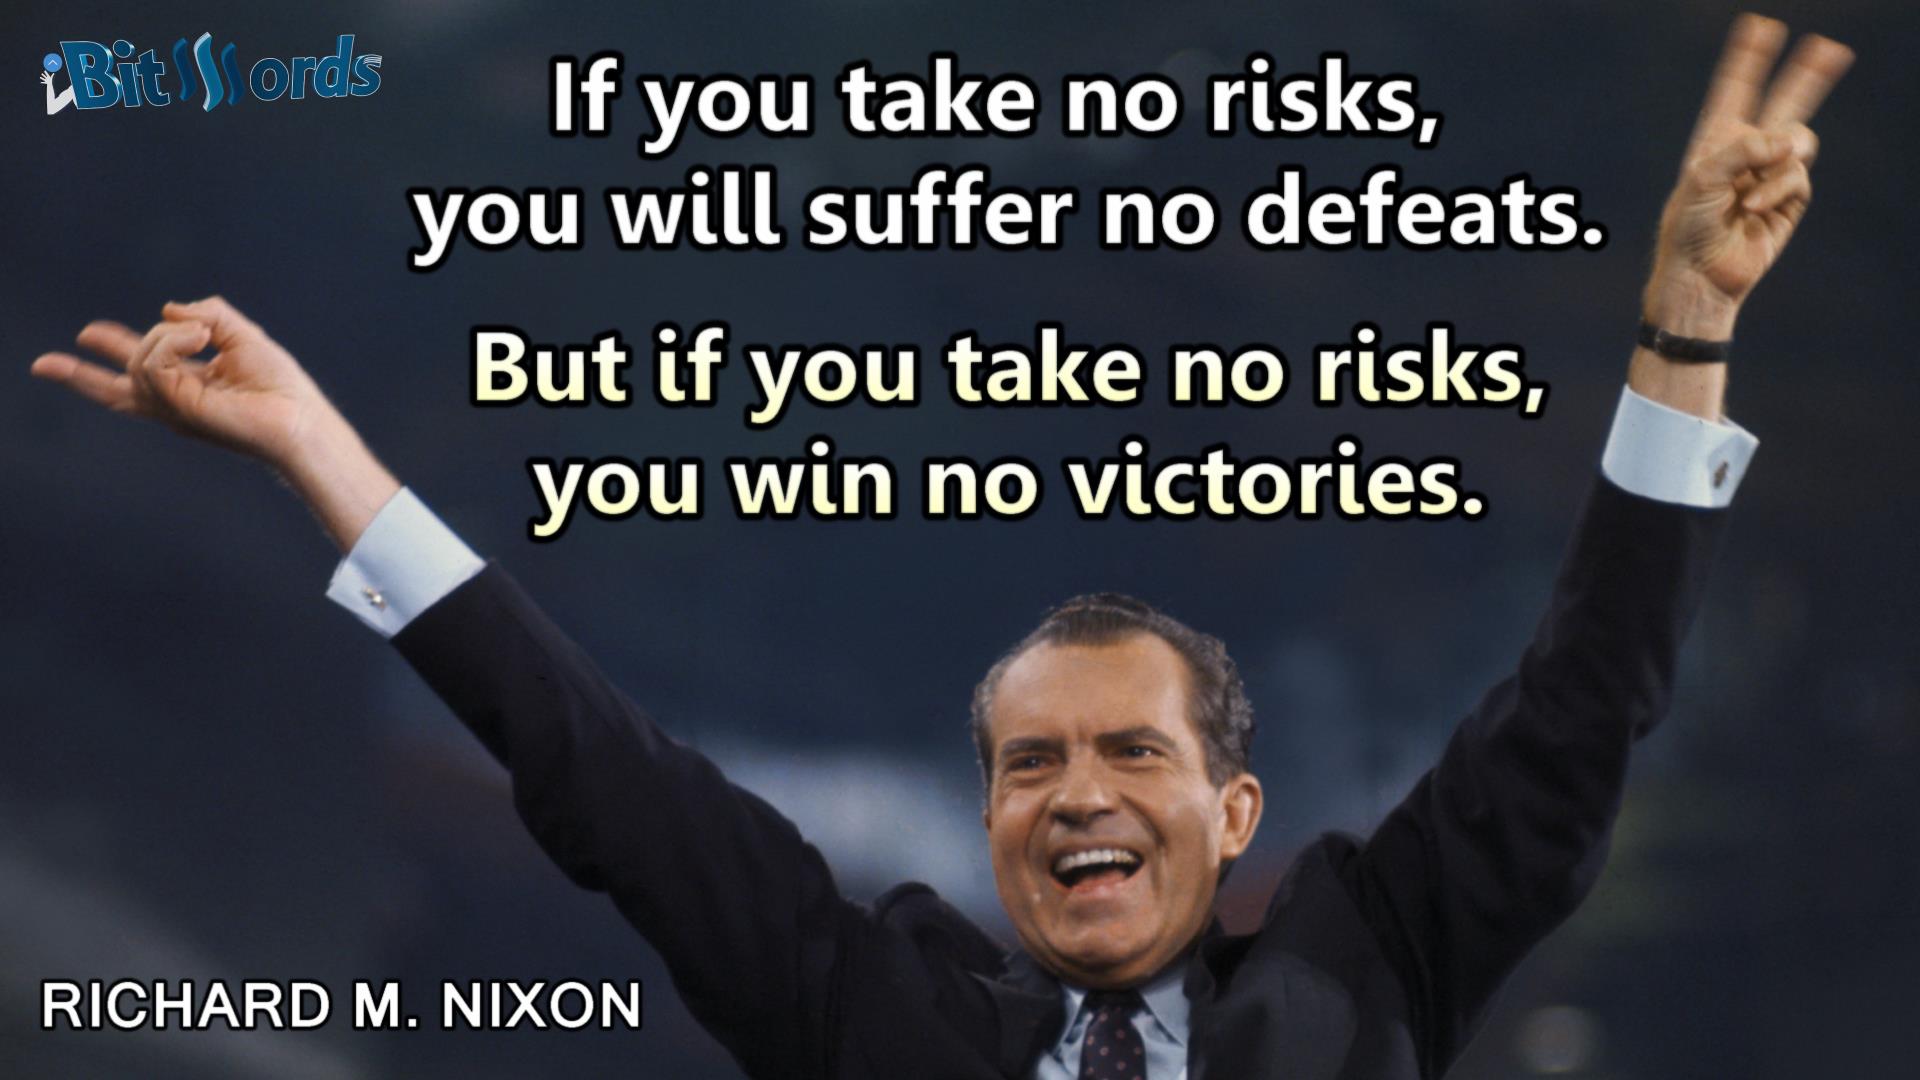 bitwords steemit daily dose of motivation If you take no risks, you will suffer no defeats. But if you take no risks, you win no victories.Richard M. Nixon.jpg